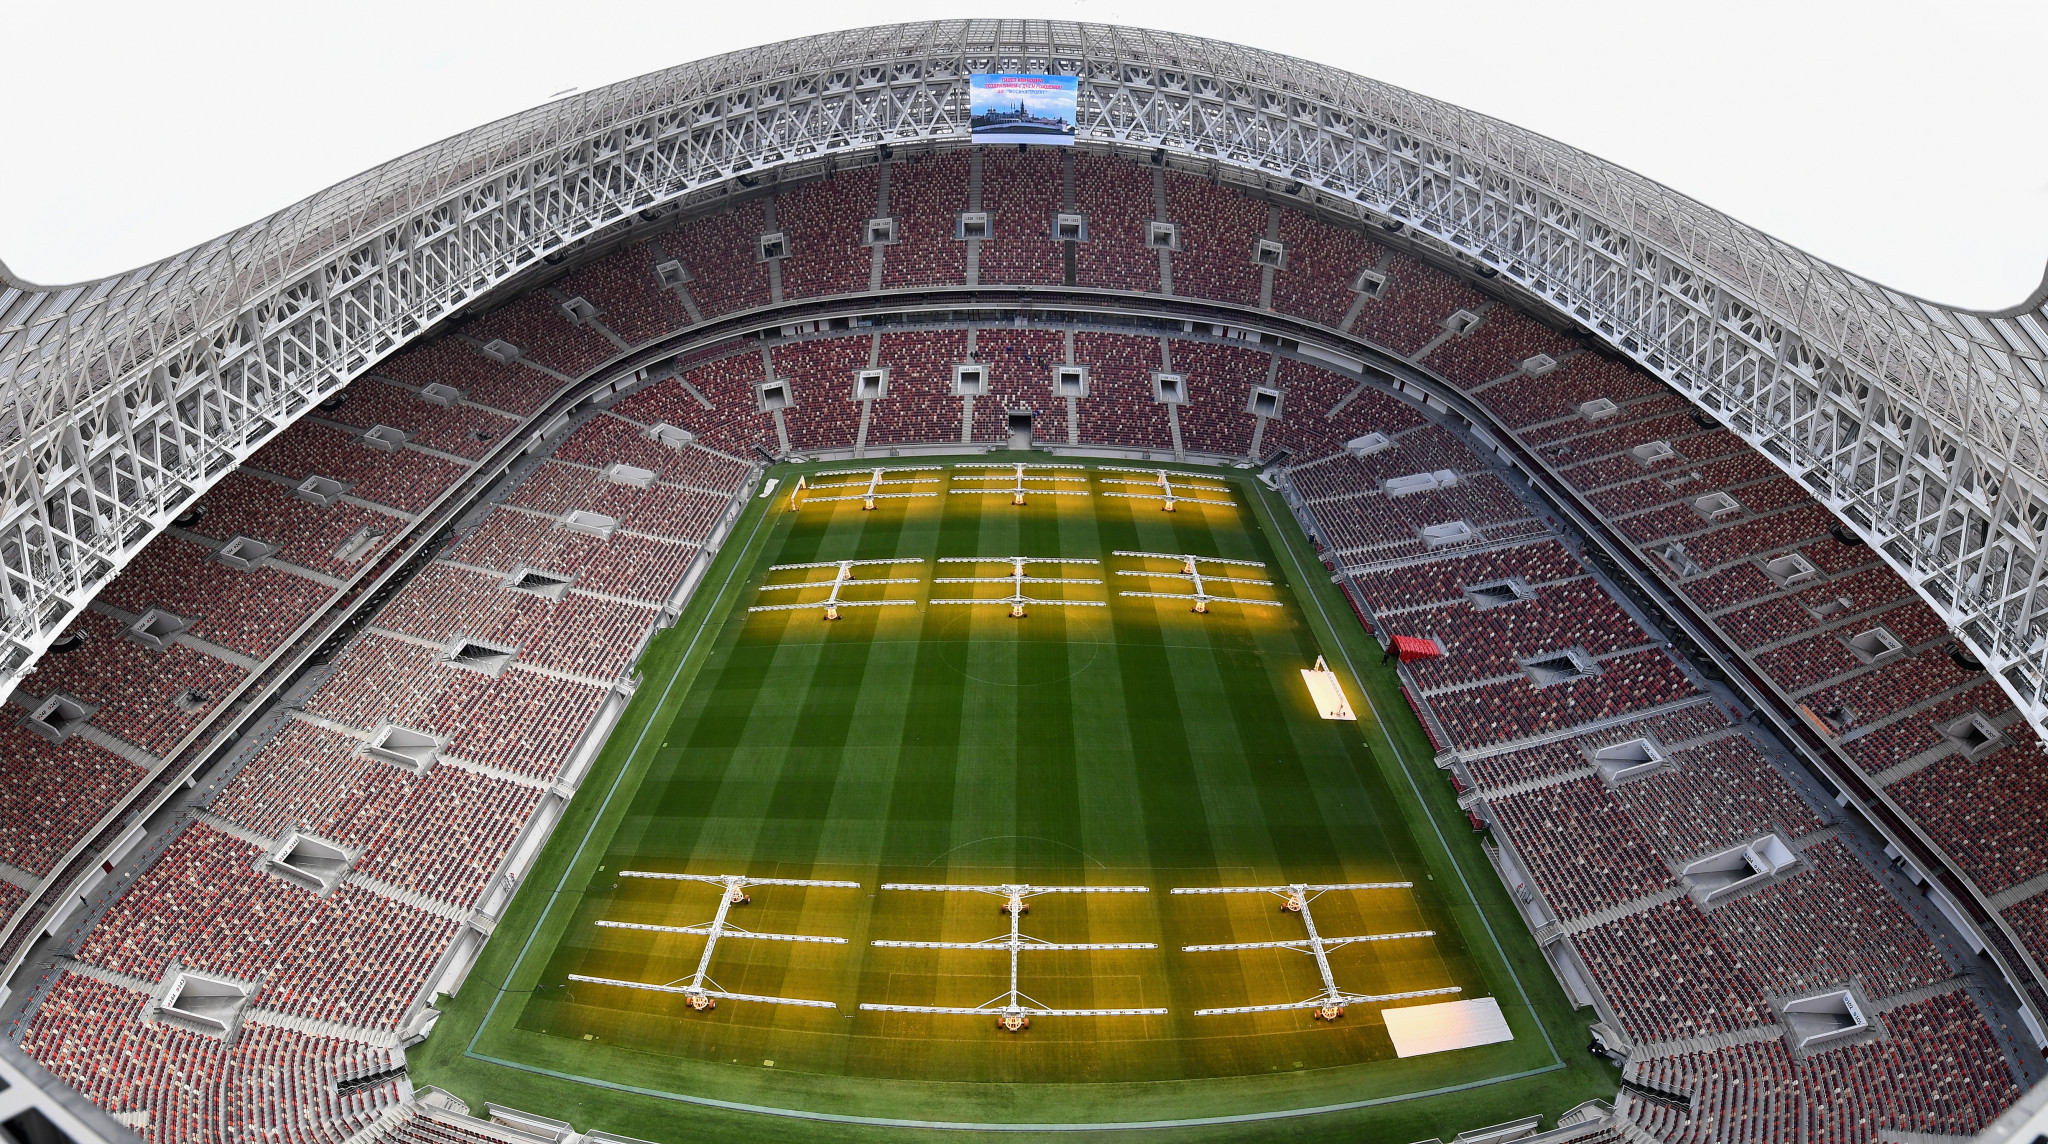 Argentina to play Russia as Luzhniki Stadium re-opened ready for FIFA World Cup